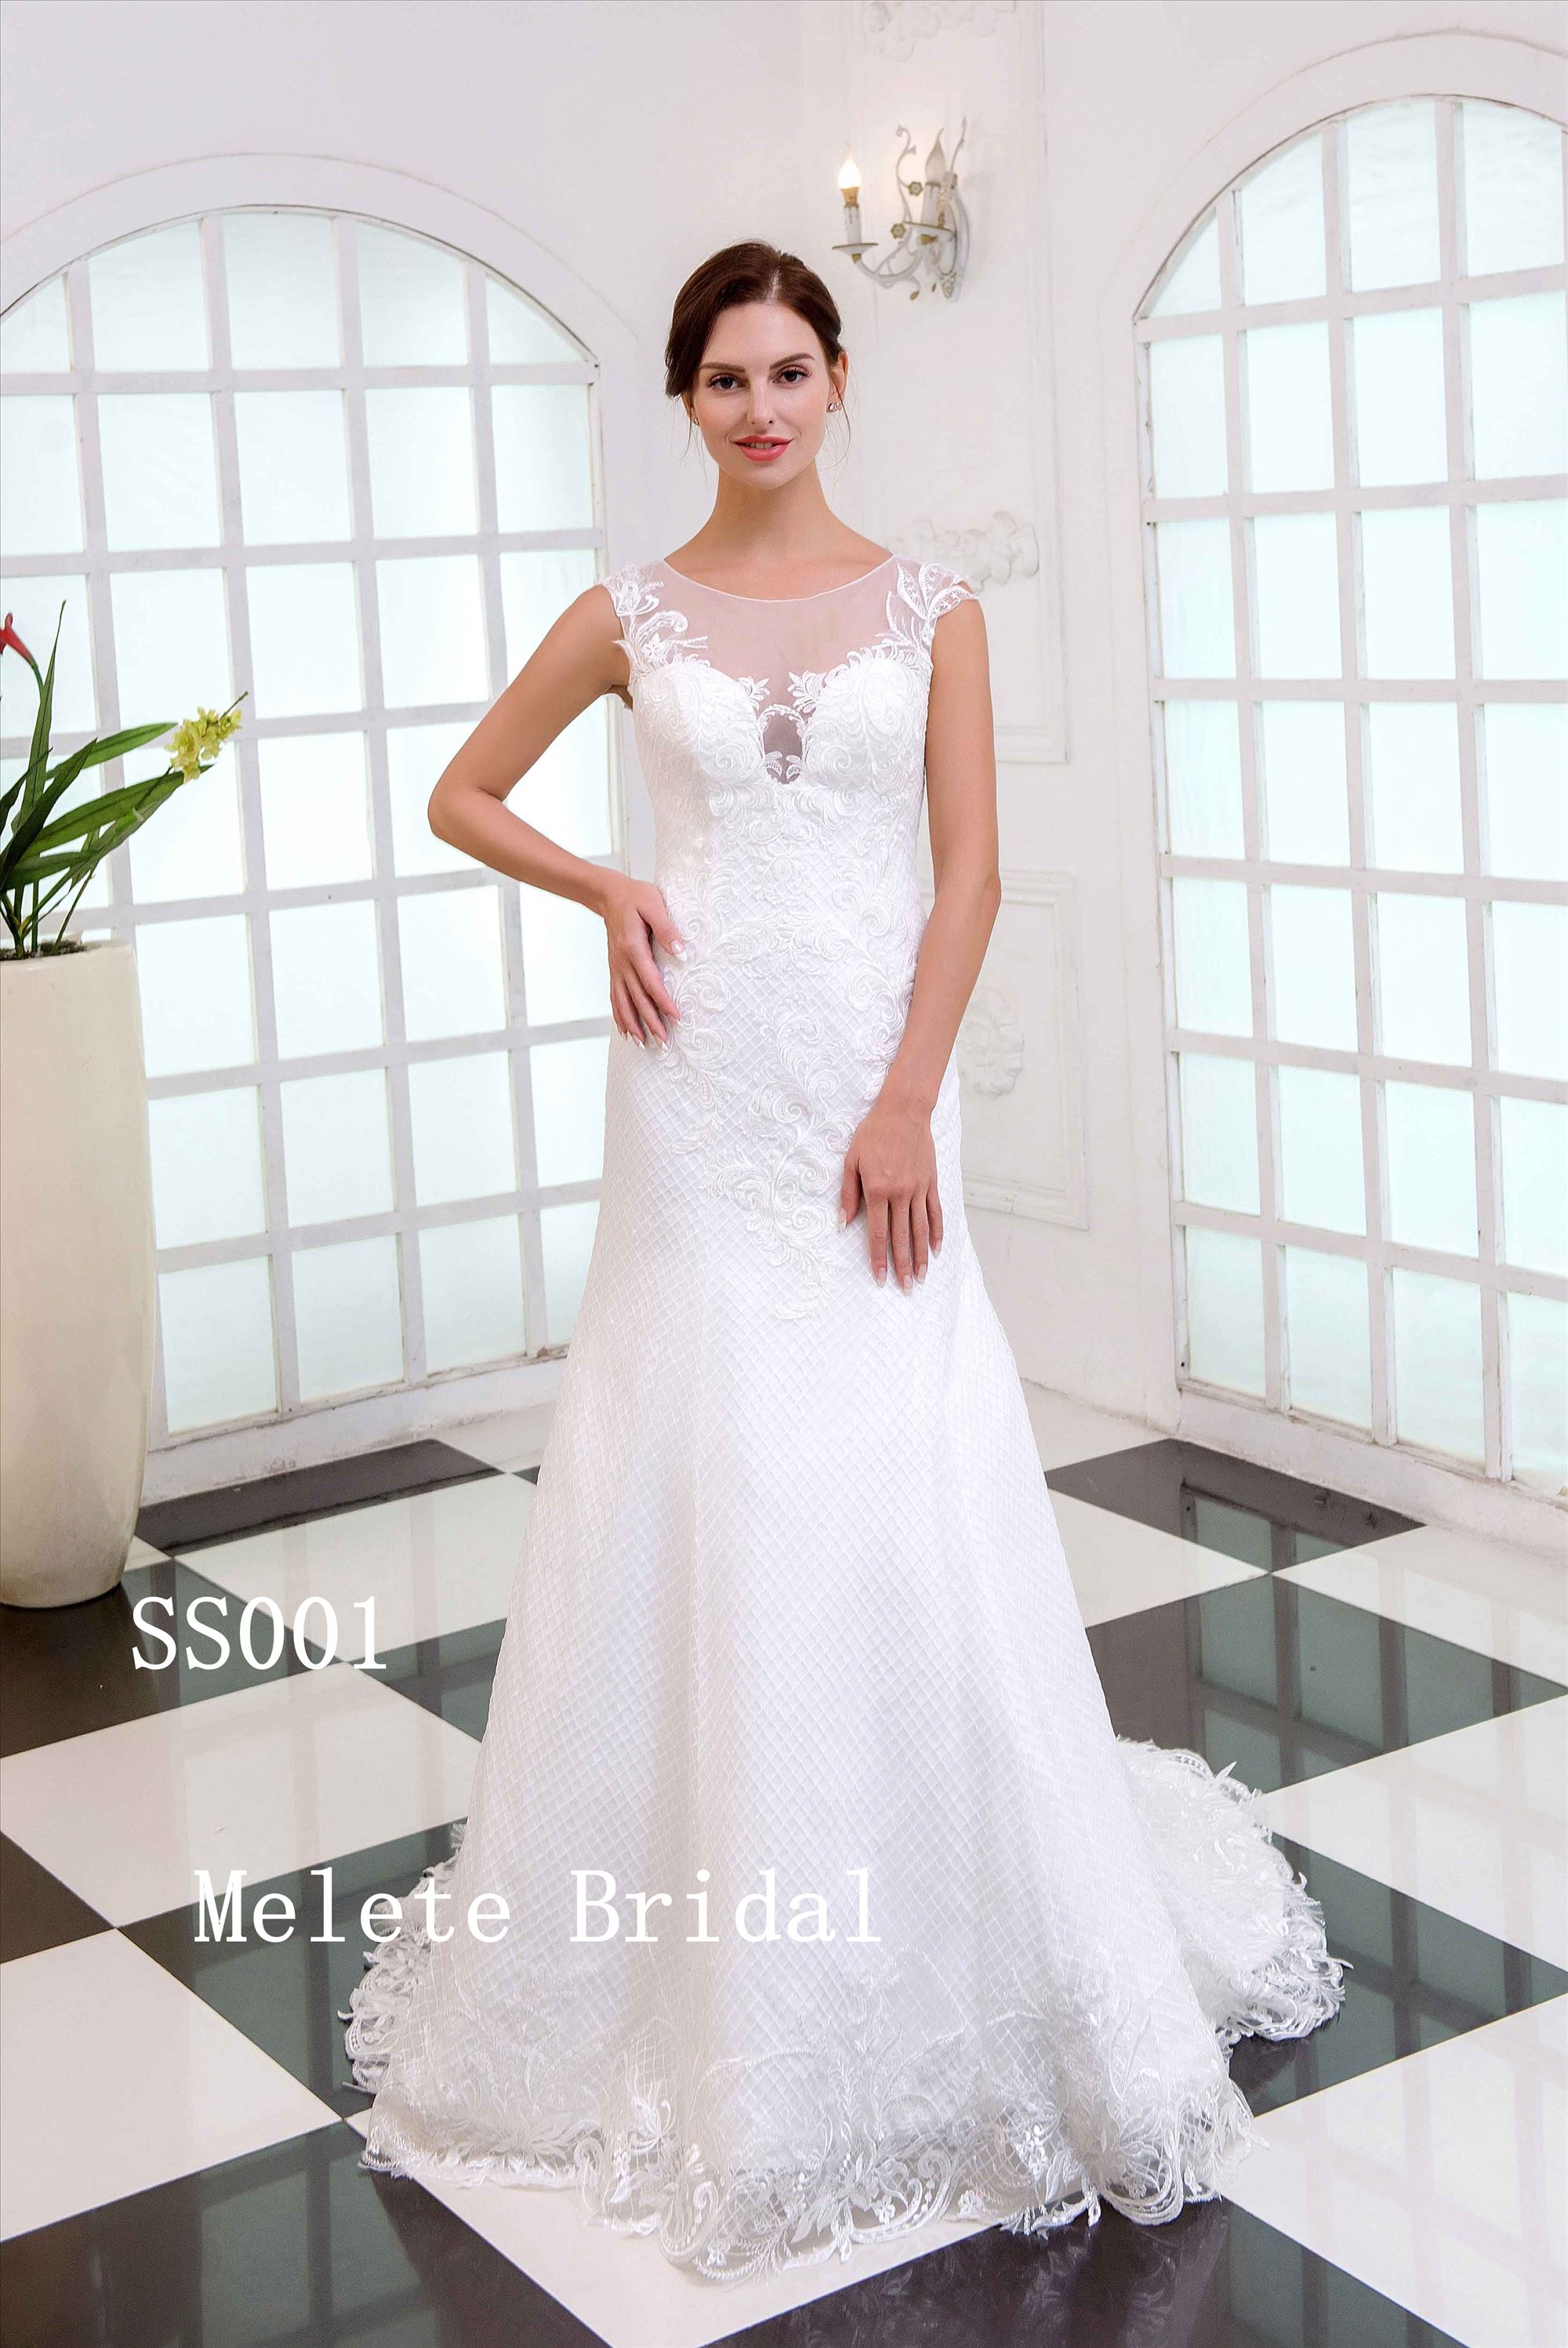 Lattice tulle lace applique cap sleeves bridal gown custom made wedding gown